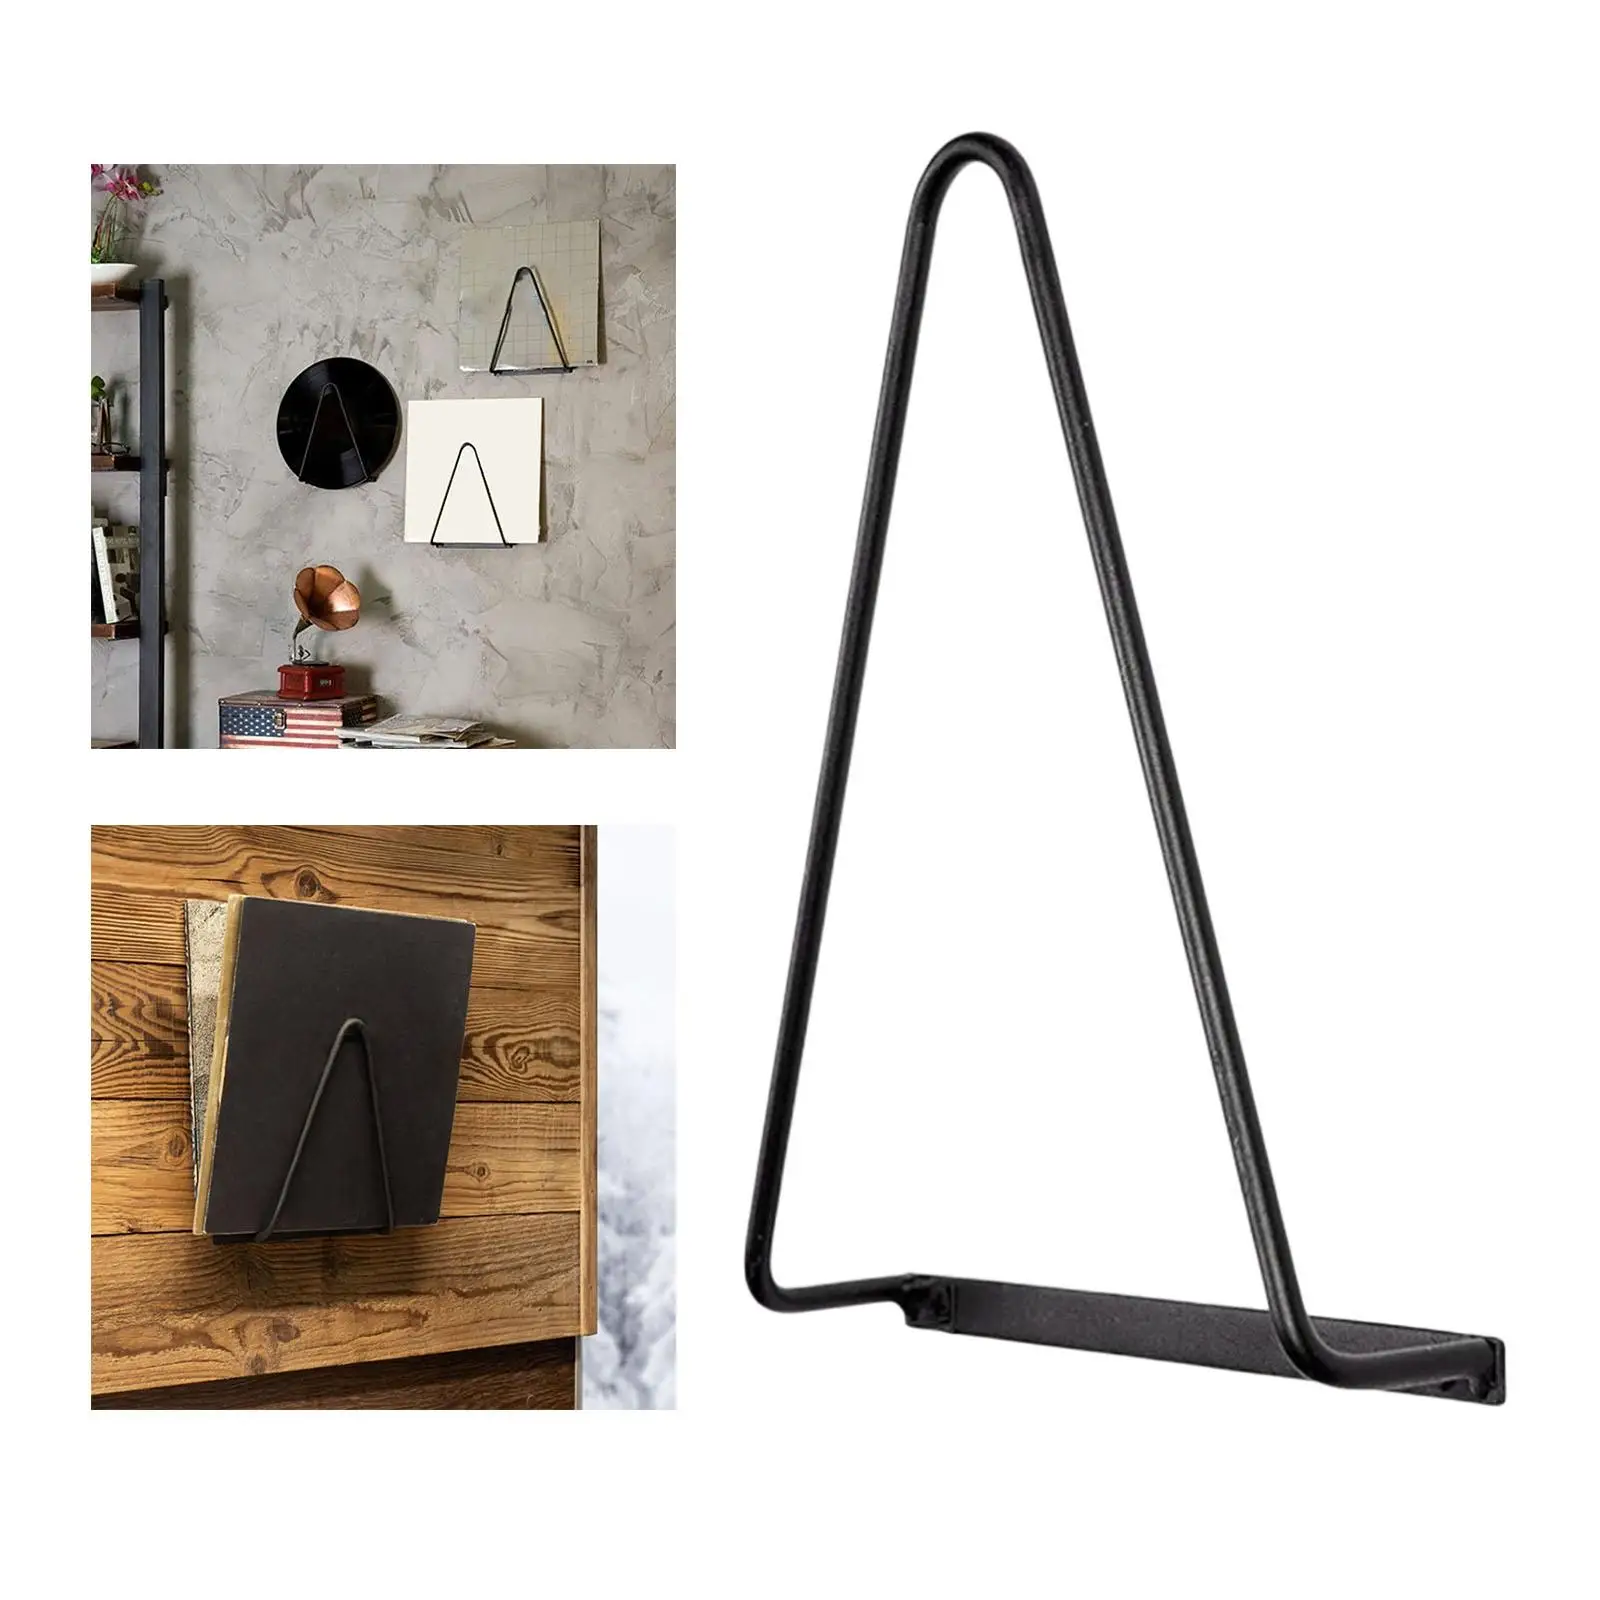 Creative Metal Triangle Wall Mounted Records Storage Rack for Documents, s, Books, Records, Newspapers